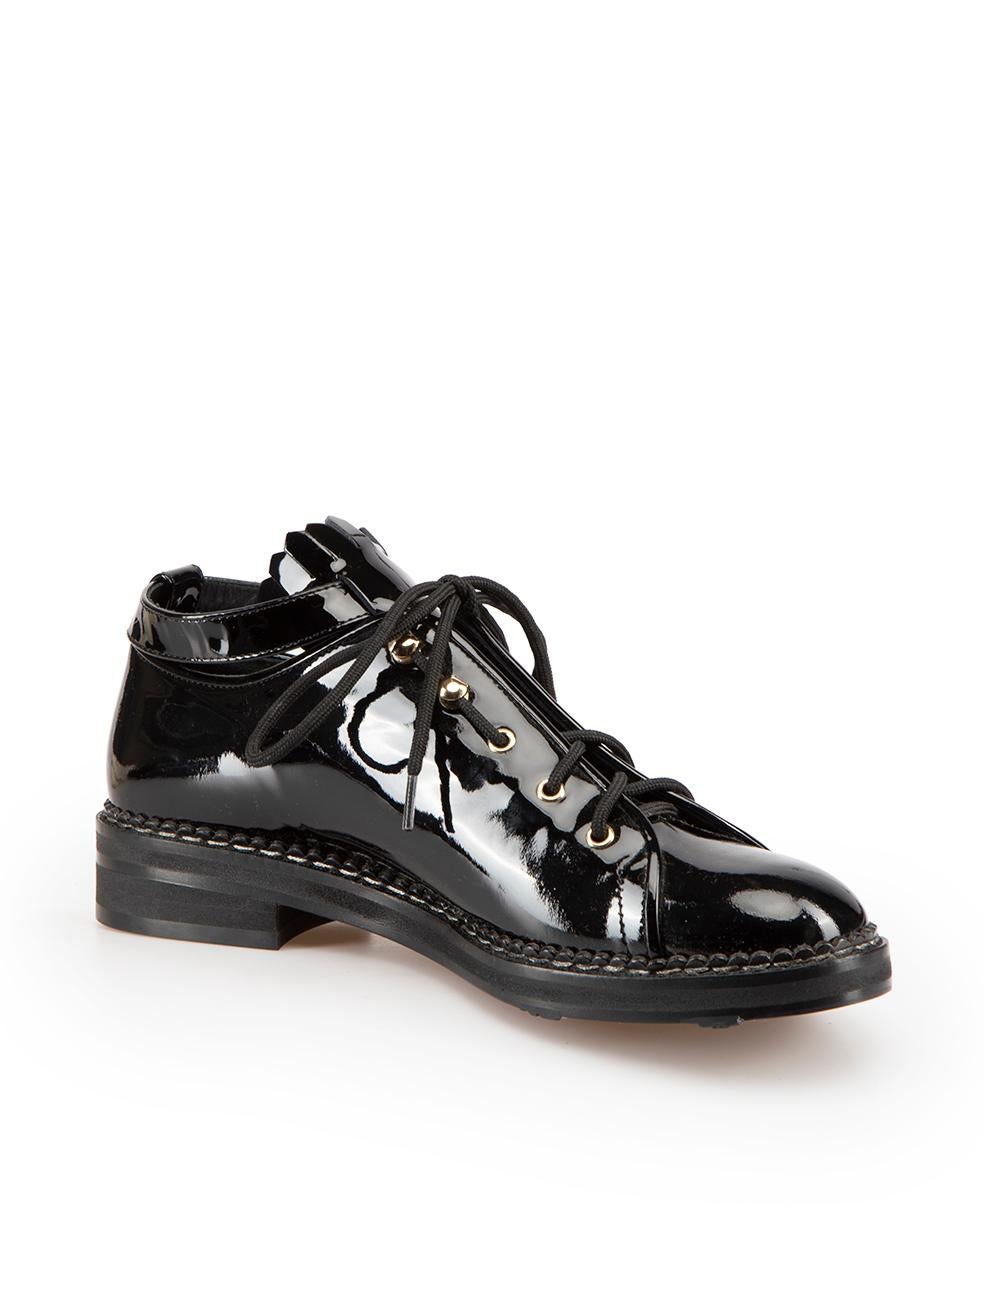 CONDITION is Never worn. No visible wear to shoes is evident on this new Max Mara designer resale item.
 
 Details
 Black
 Patent leather
 Brogues
 Round toe
 Lace up fastening
 Ankle strap detail
 
 
 Made in Italy
 
 Composition
 EXTERIOR: Patent